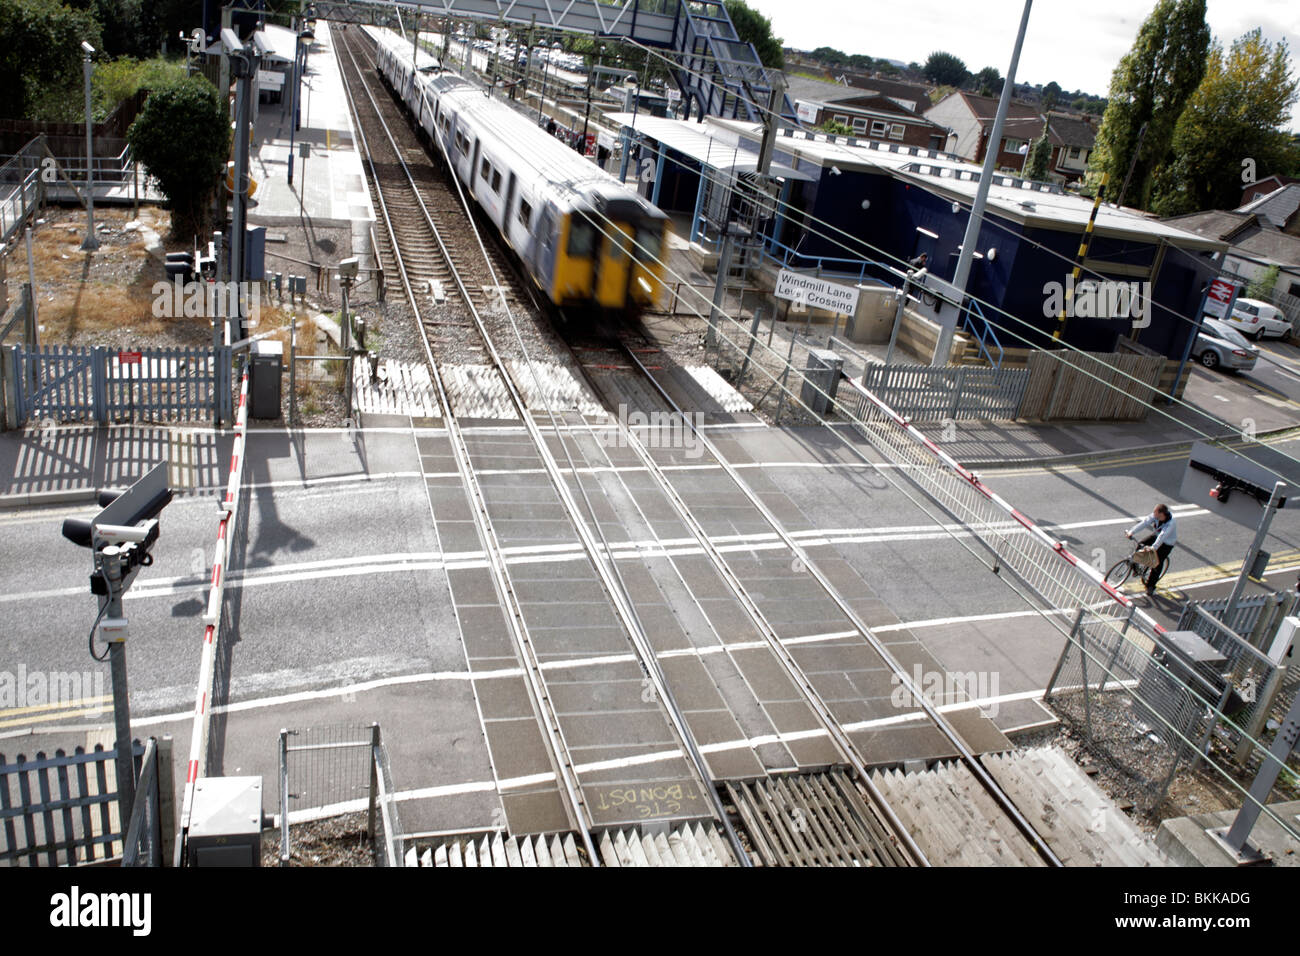 Commuter train entering a level crossing at speed Stock Photo